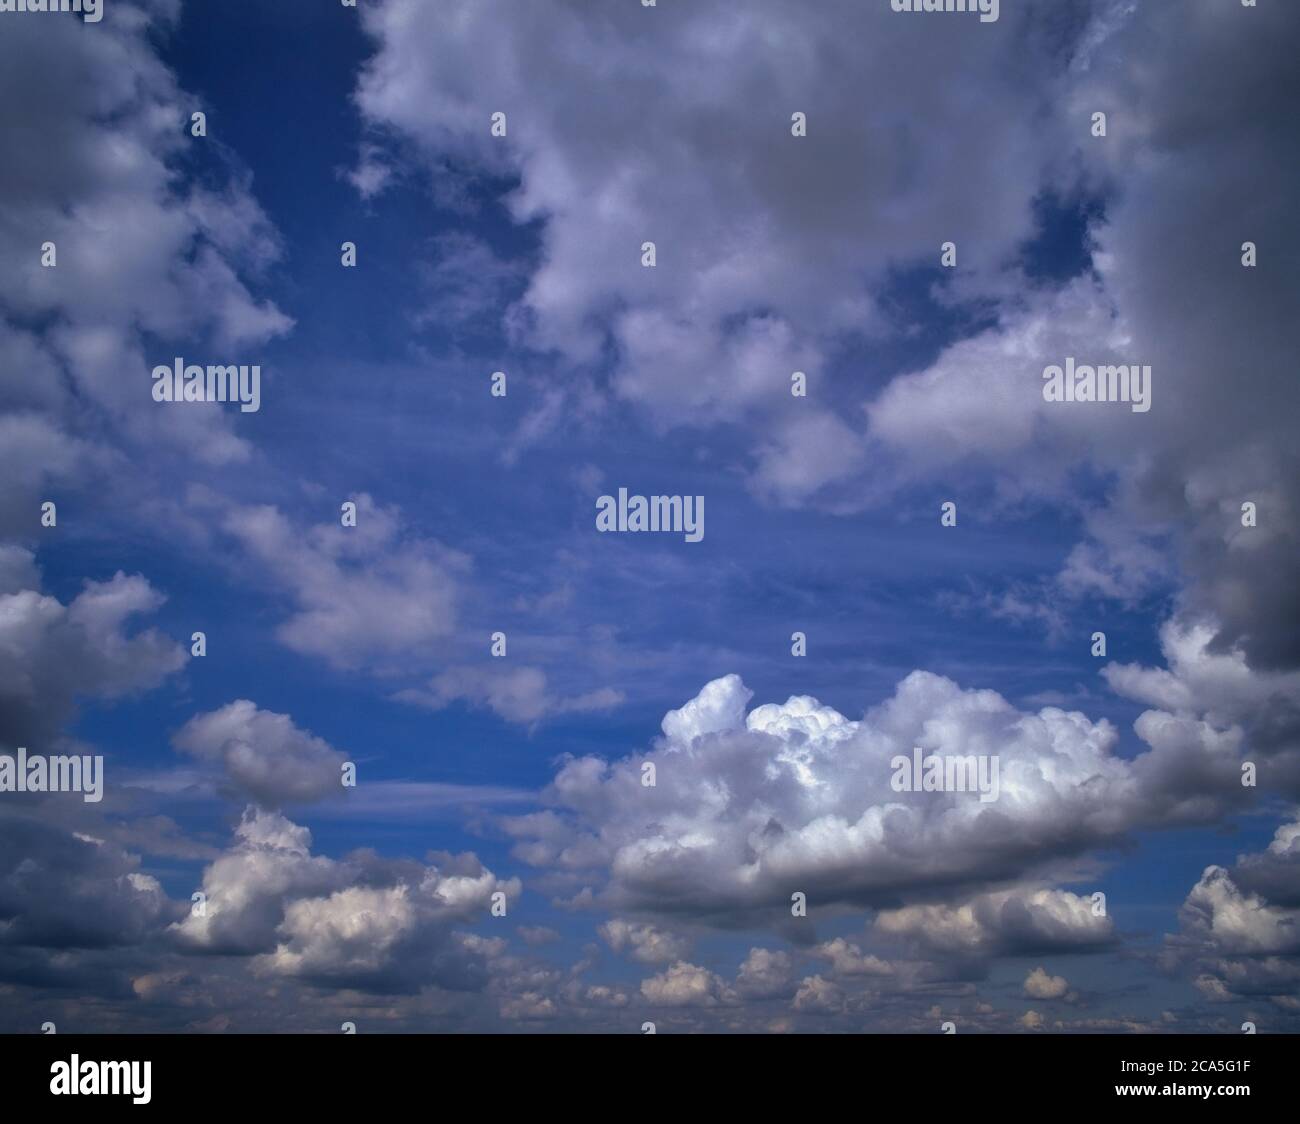 CONCEPT PHOTOGRAPHY: Clouds in sky for commercial background Stock Photo